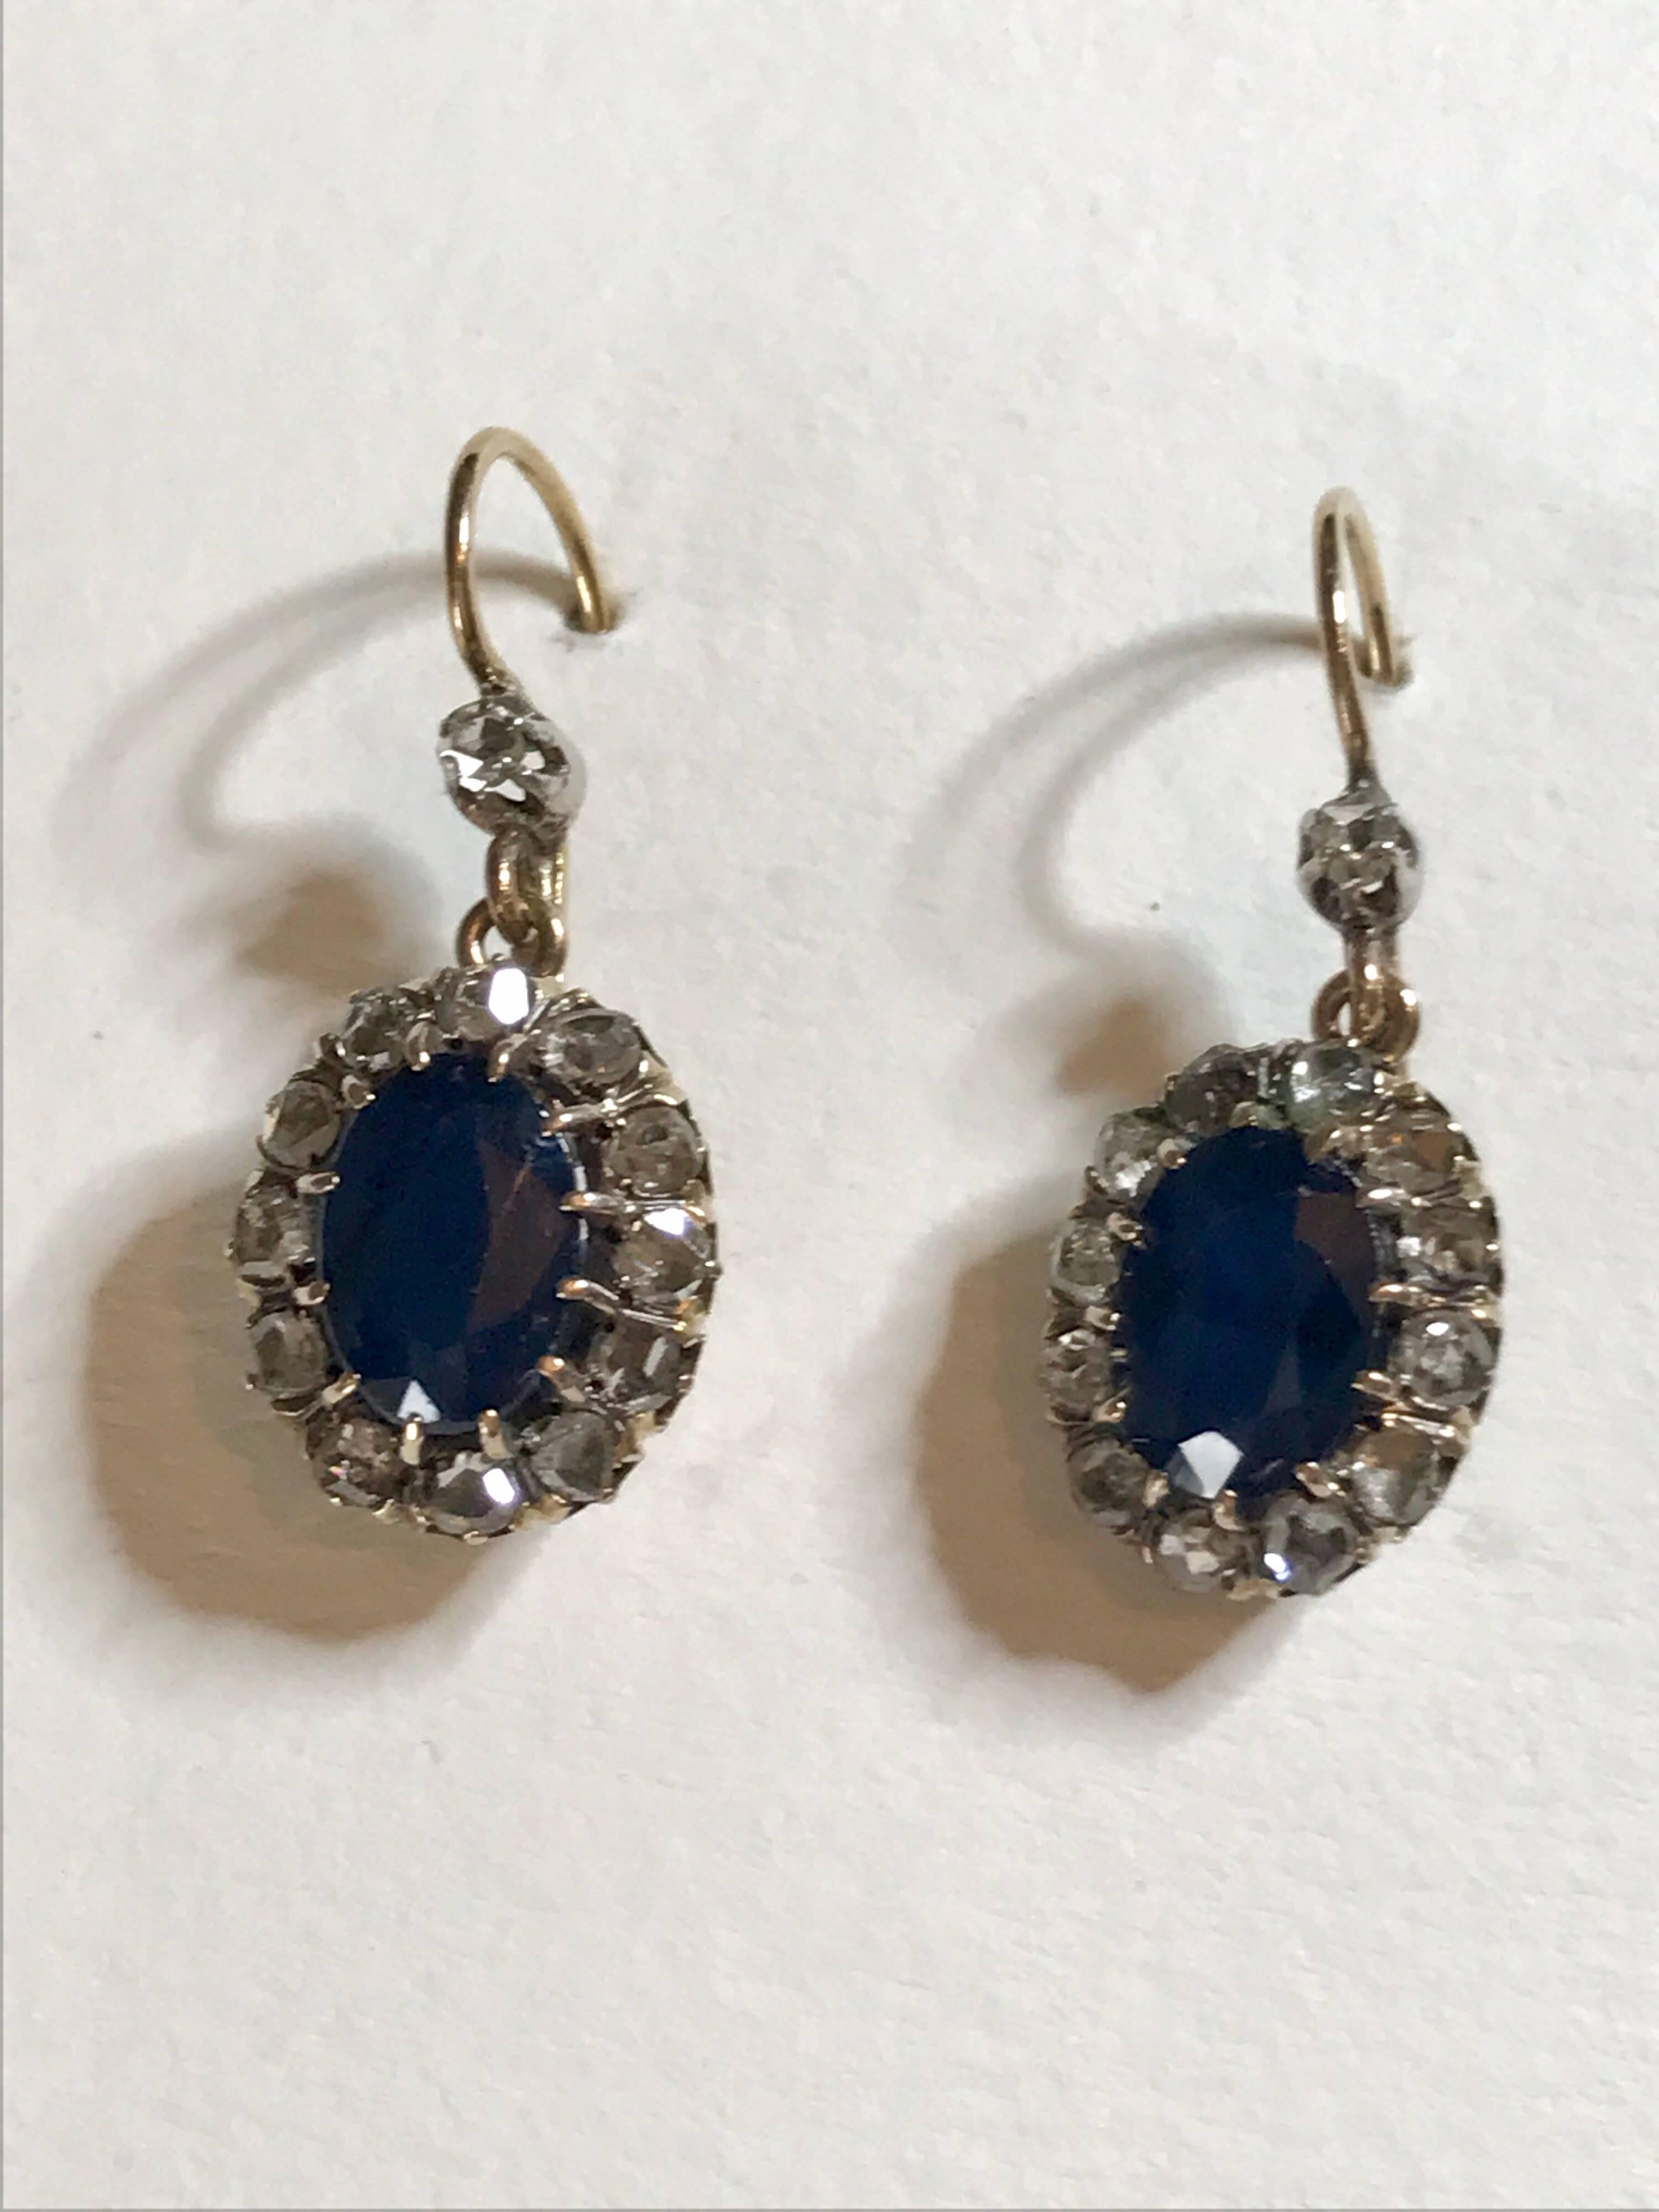 A pair of natural blue sapphire and rose cut diamond earrings